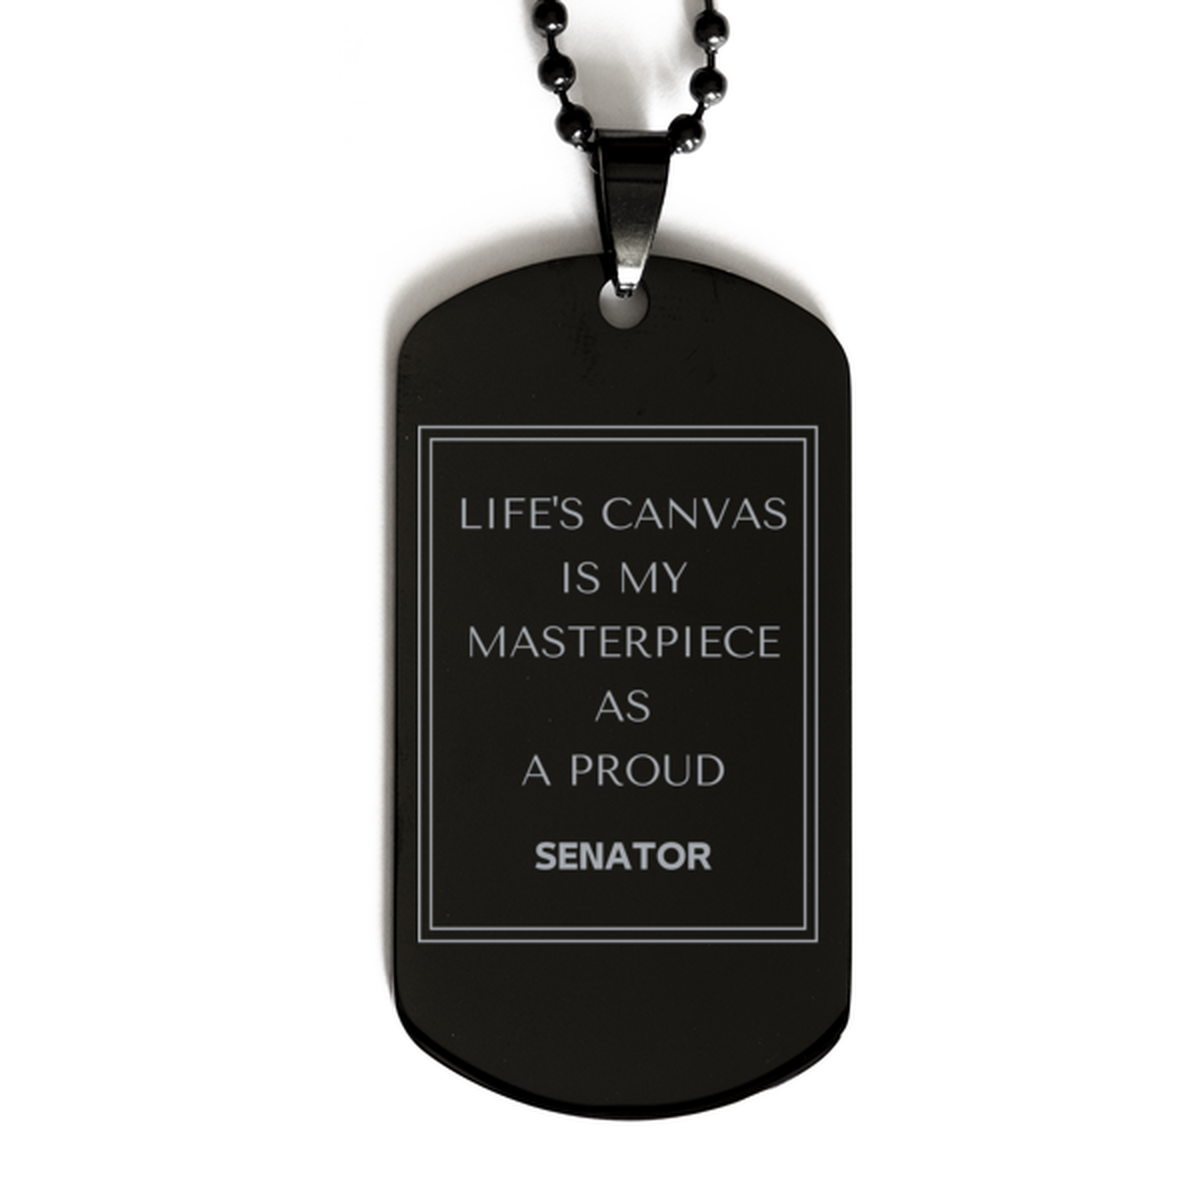 Proud Senator Gifts, Life's canvas is my masterpiece, Epic Birthday Christmas Unique Black Dog Tag For Senator, Coworkers, Men, Women, Friends